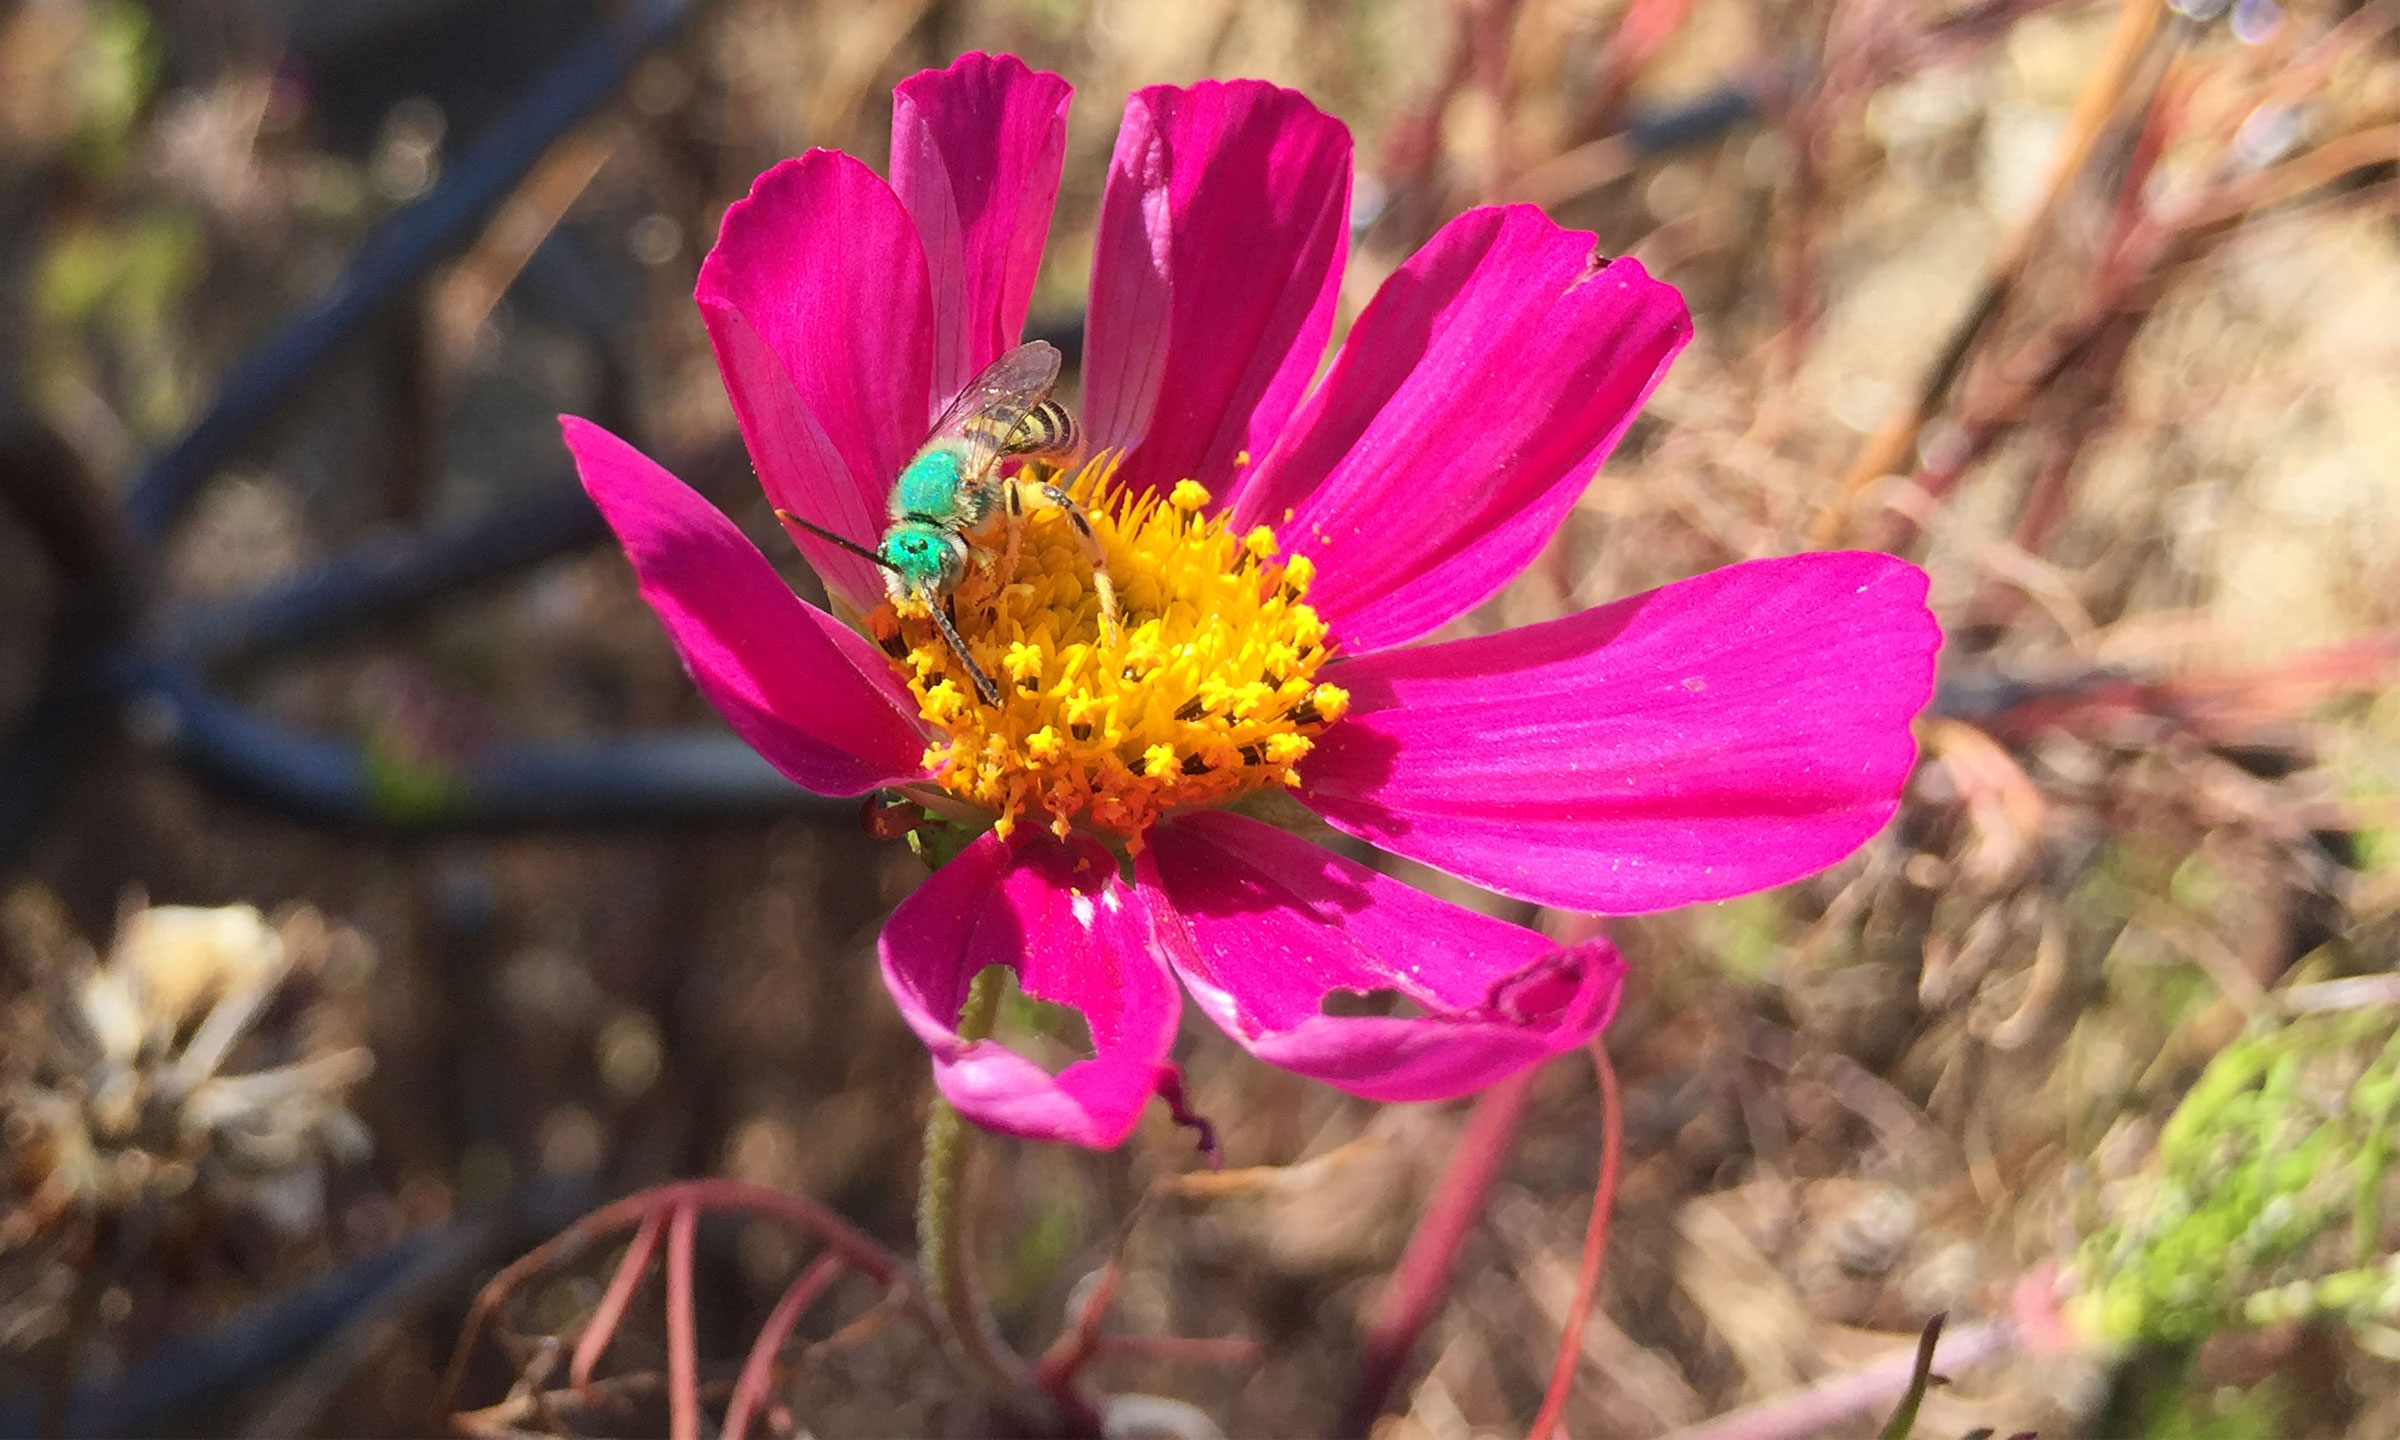 A green sweat bee sits inside a bright pink flower.